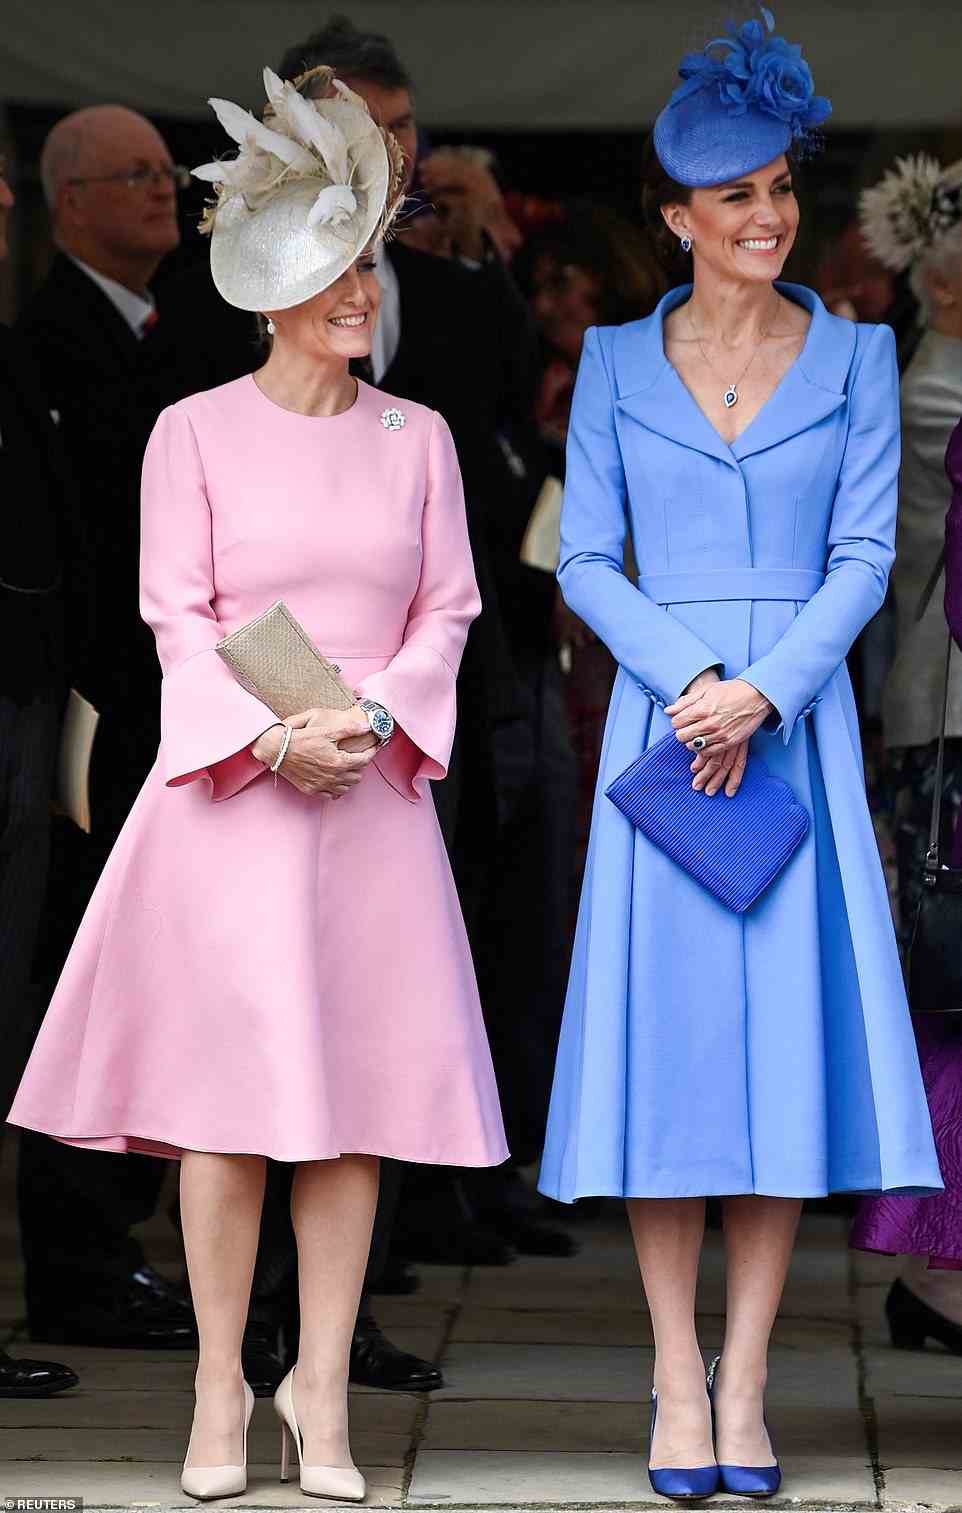 Kate Middleton, 40, cut a chic figure in a stunning coat dress and matching £560 Juliette Botterill hat as she joined fellow royals including the Prince of Wales, Duchess of Cornwall and Prince William for the occasion, which is one of the most colourful events in the royal calendar